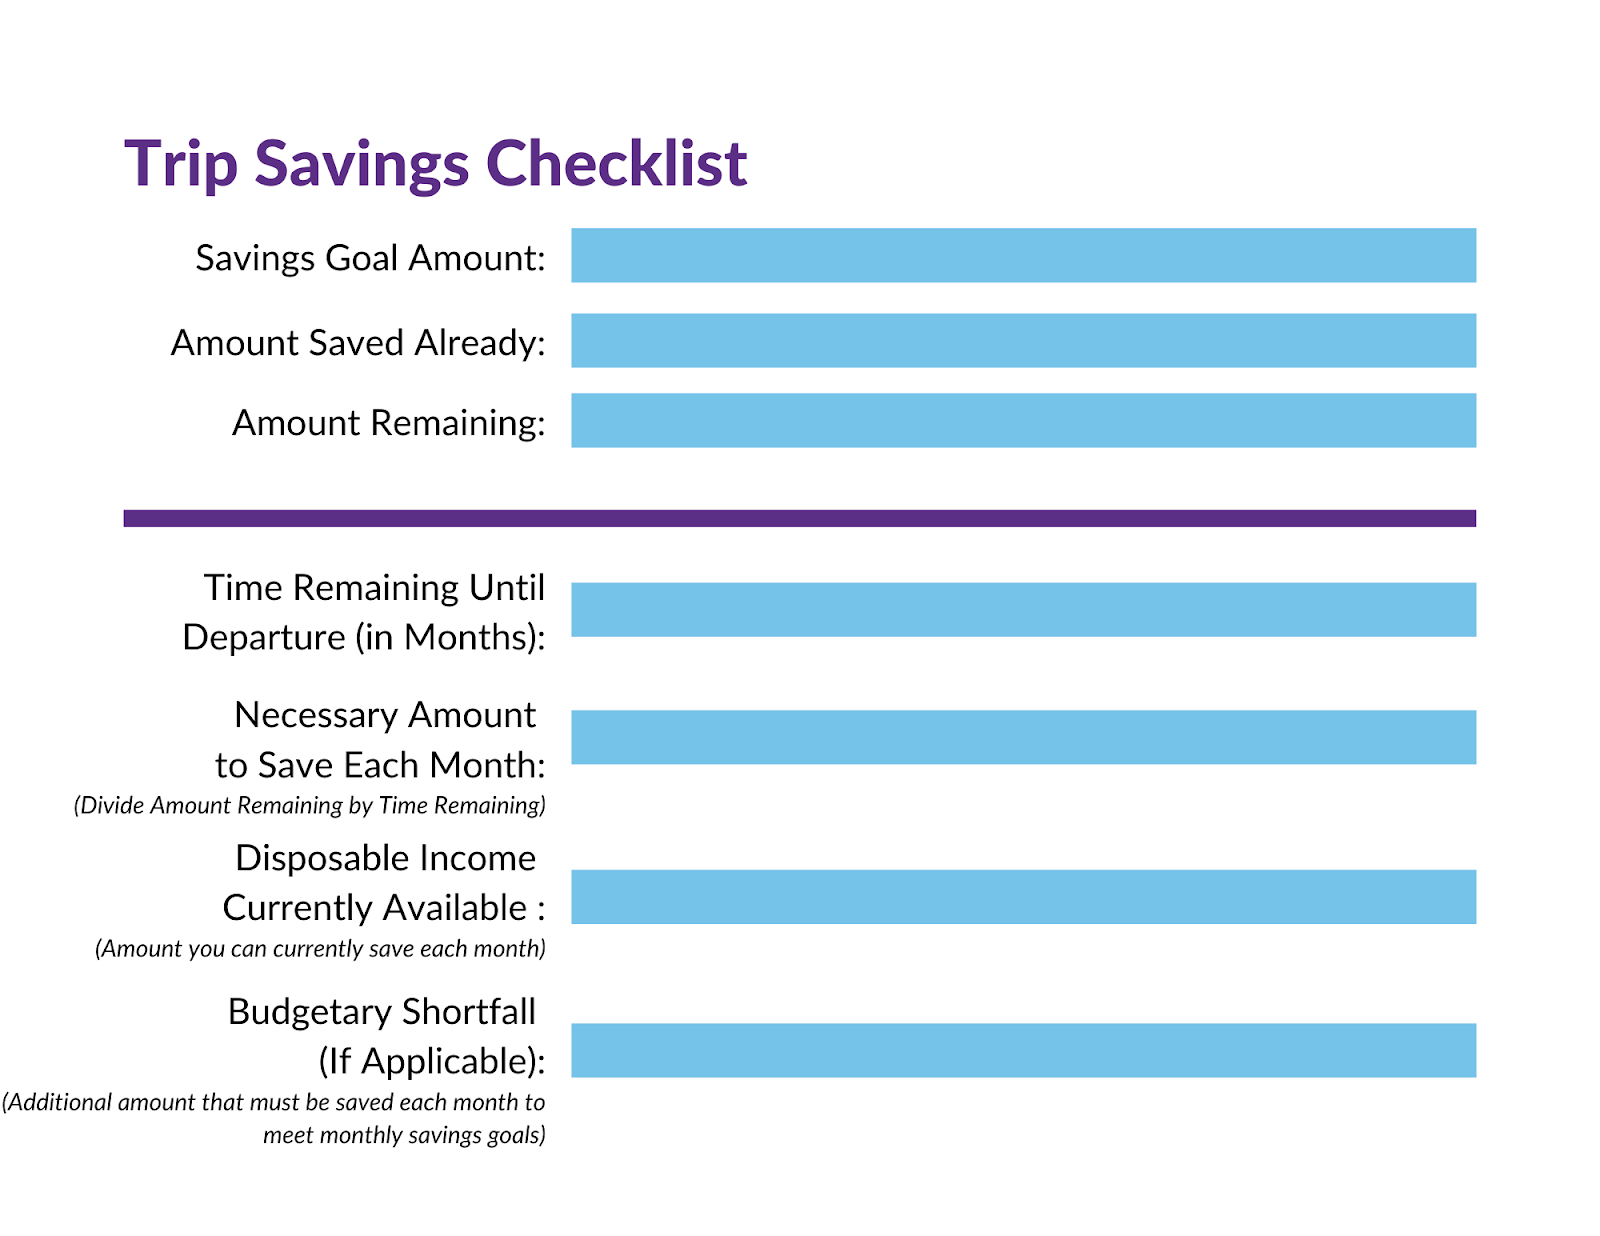 Saving during #college can seem almost impossible, but with these tips and tricks you can save almost $25K a year! #savingtips #savingmoneytips #savingmoney